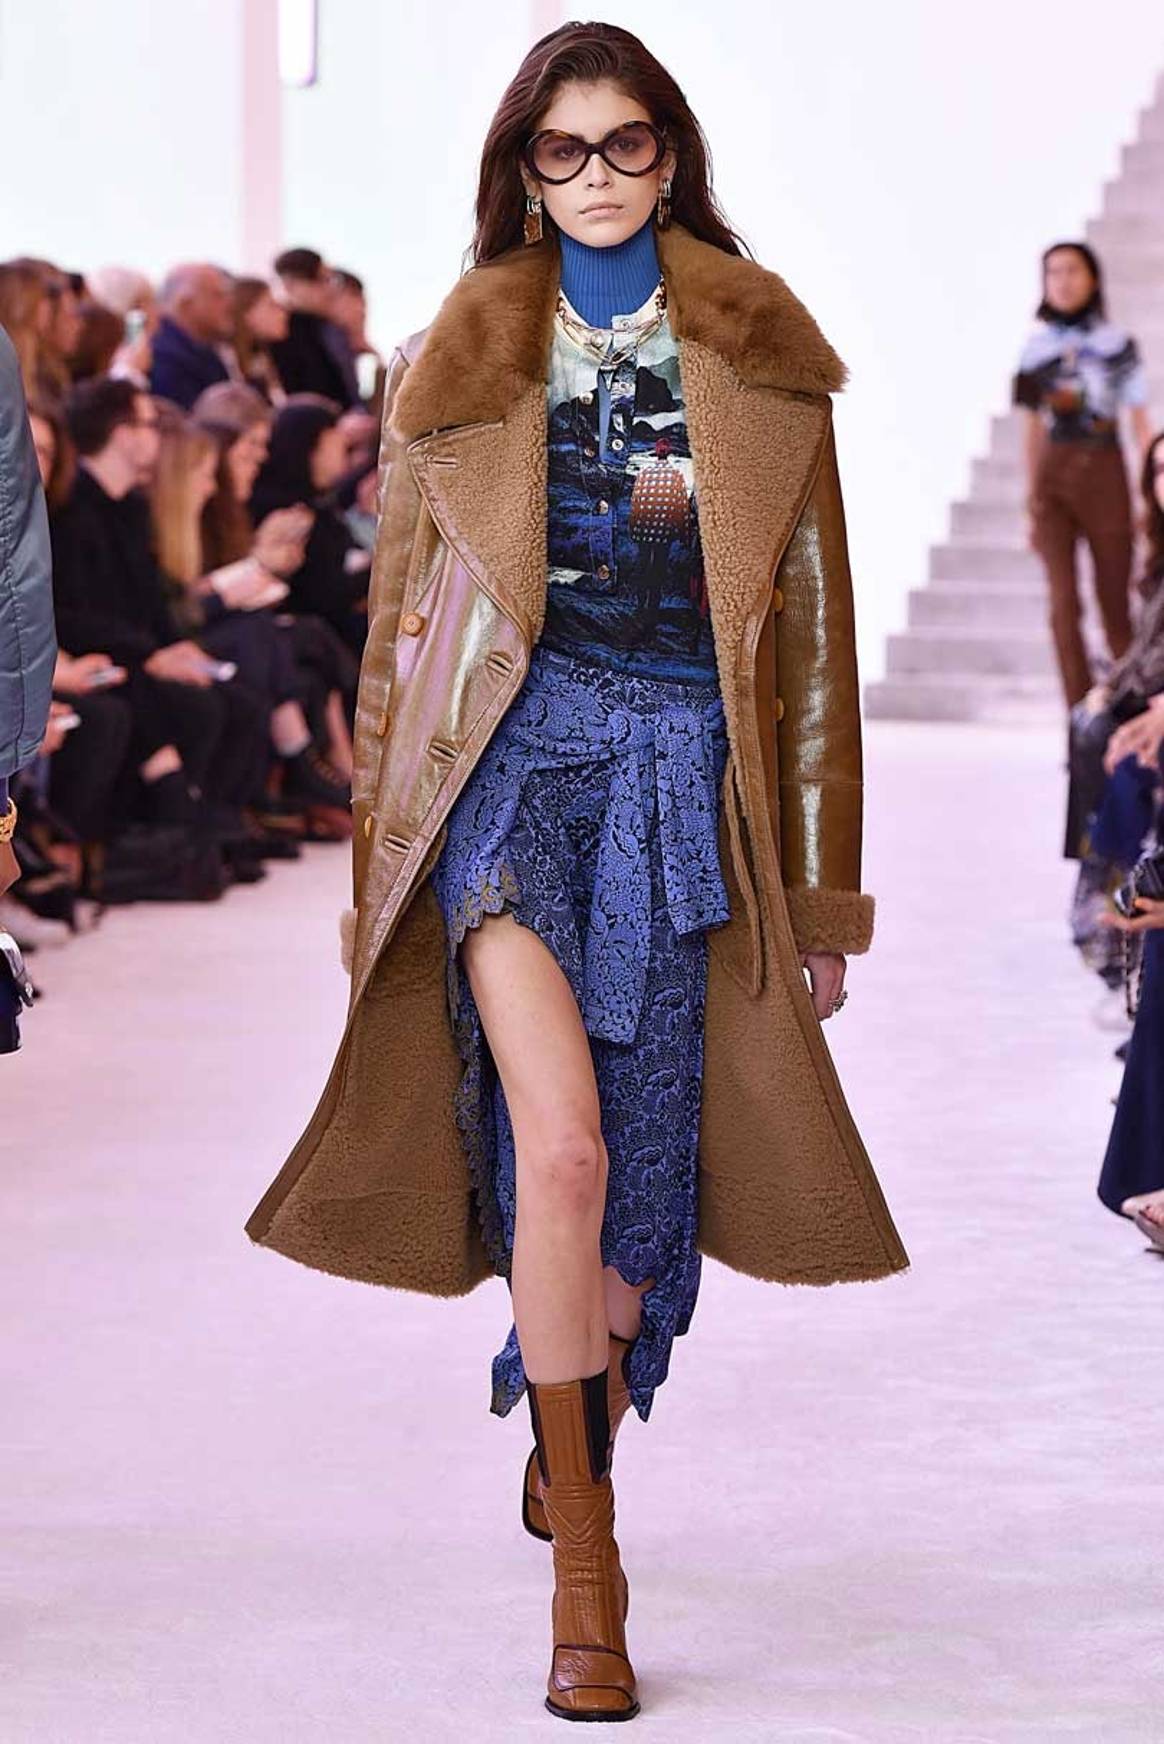 Chloe tips hat to Lagerfeld's 'genius' at Paris show